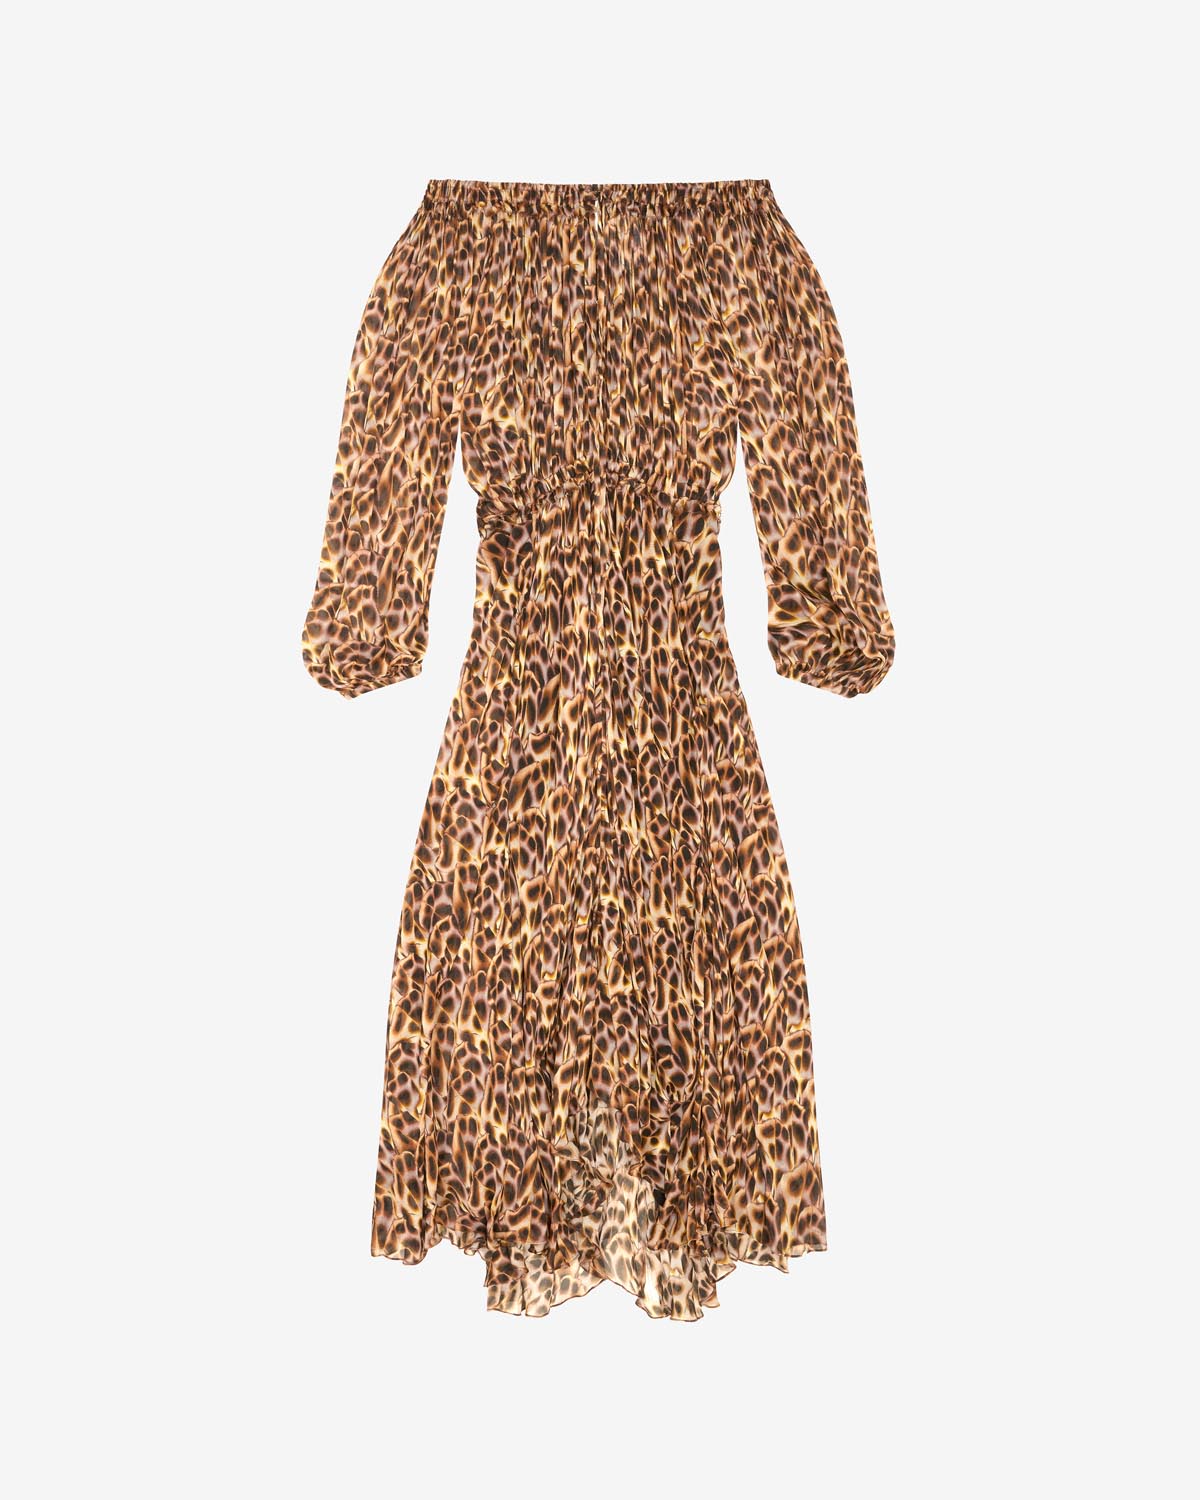 Ready-to-Wear Etoile Woman | ISABEL MARANT Official Online Store